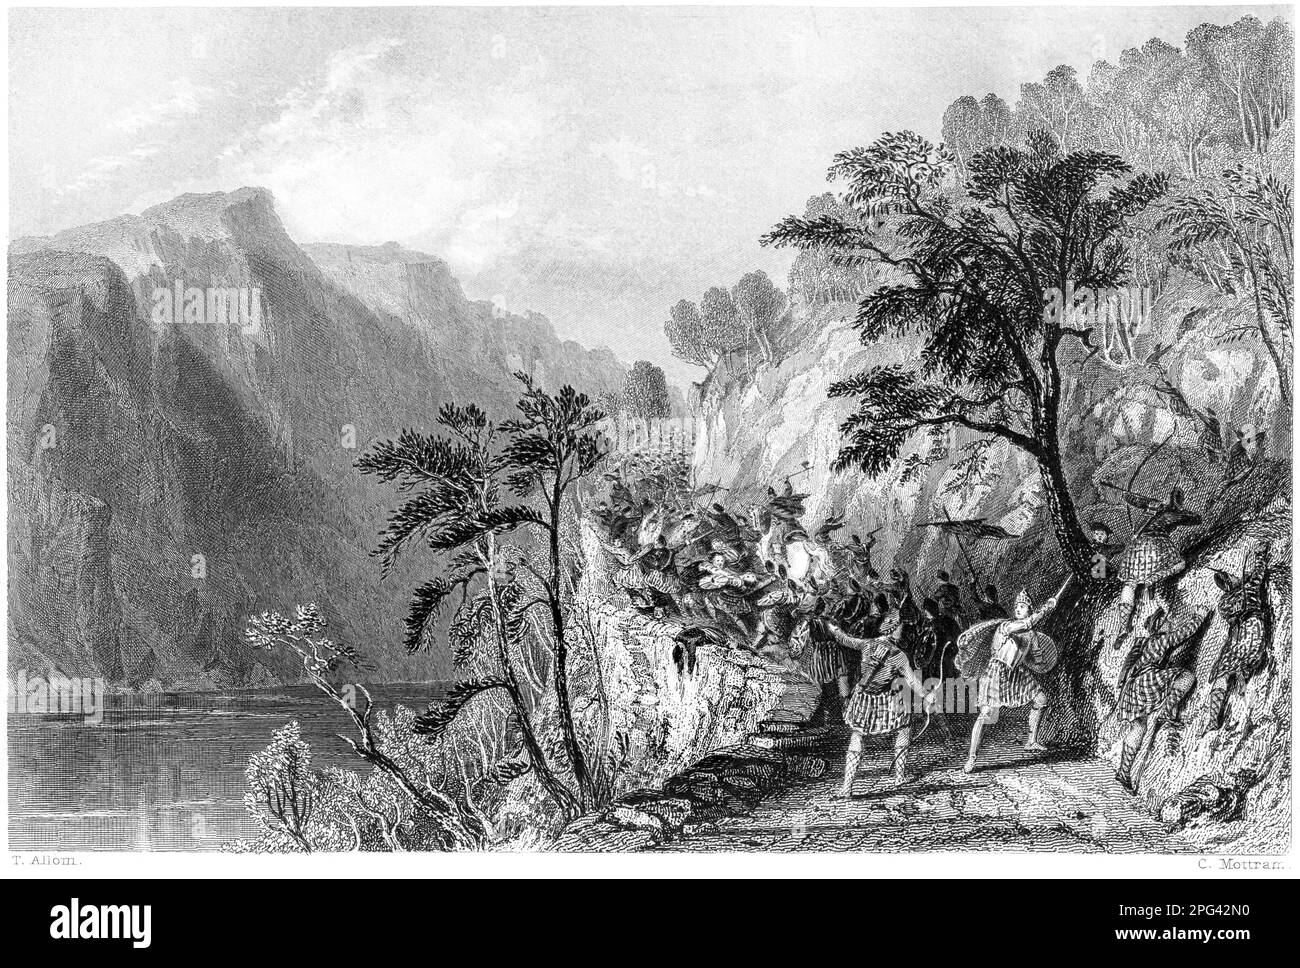 Engraving of the Pass of Awe, Argyleshire, Scotland UK scanned at high resolution from a book printed in 1840.  Battle of the Pass of Brander in 1308. Stock Photo